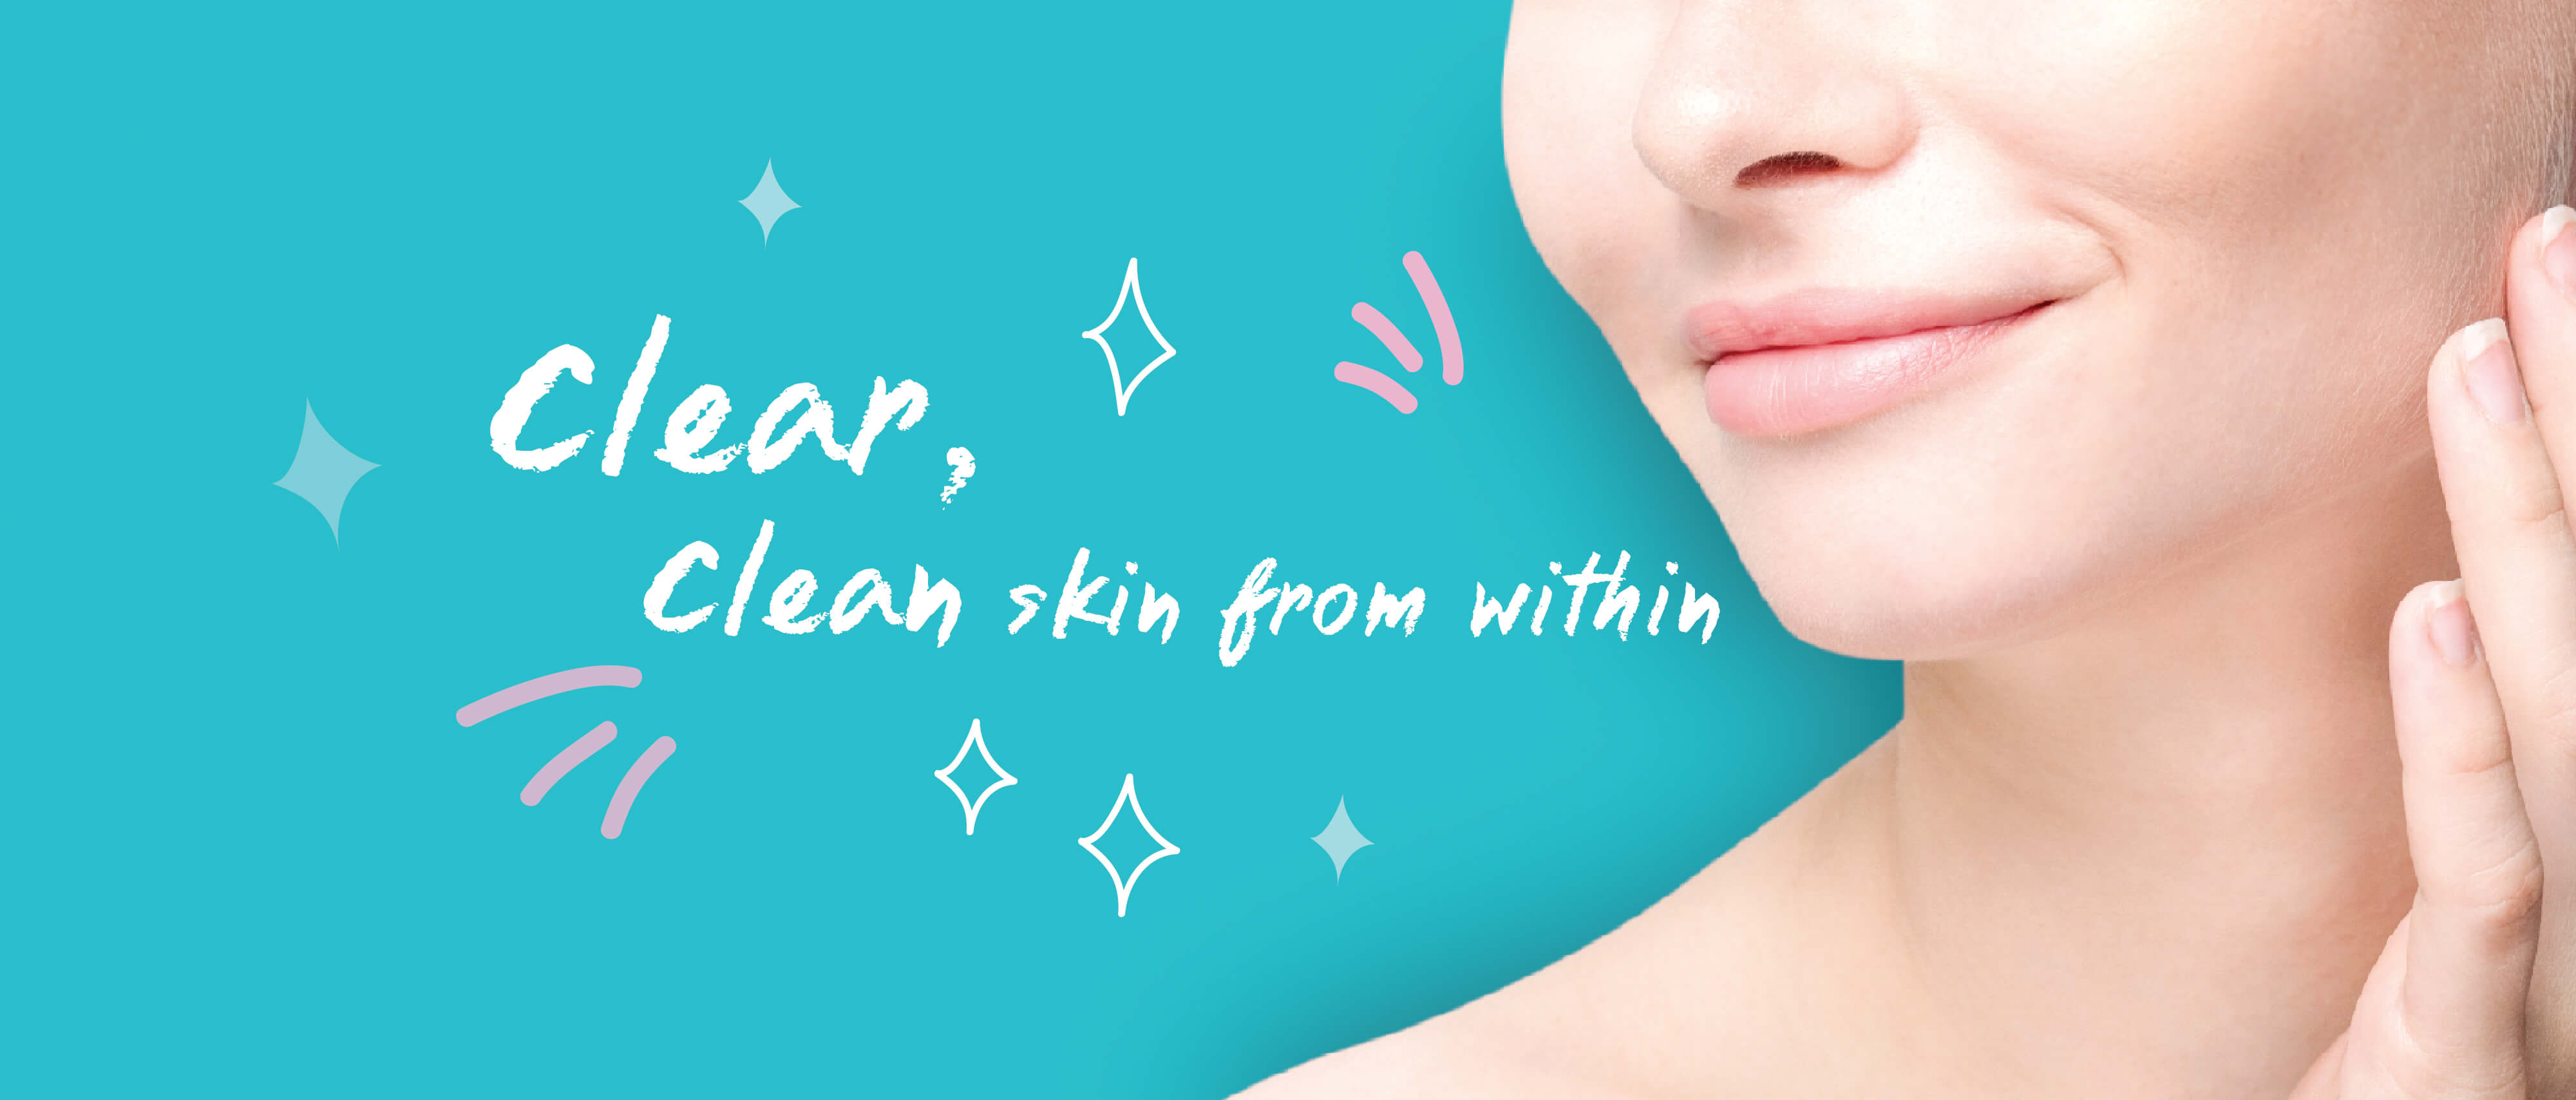 Clear, clean skin from within